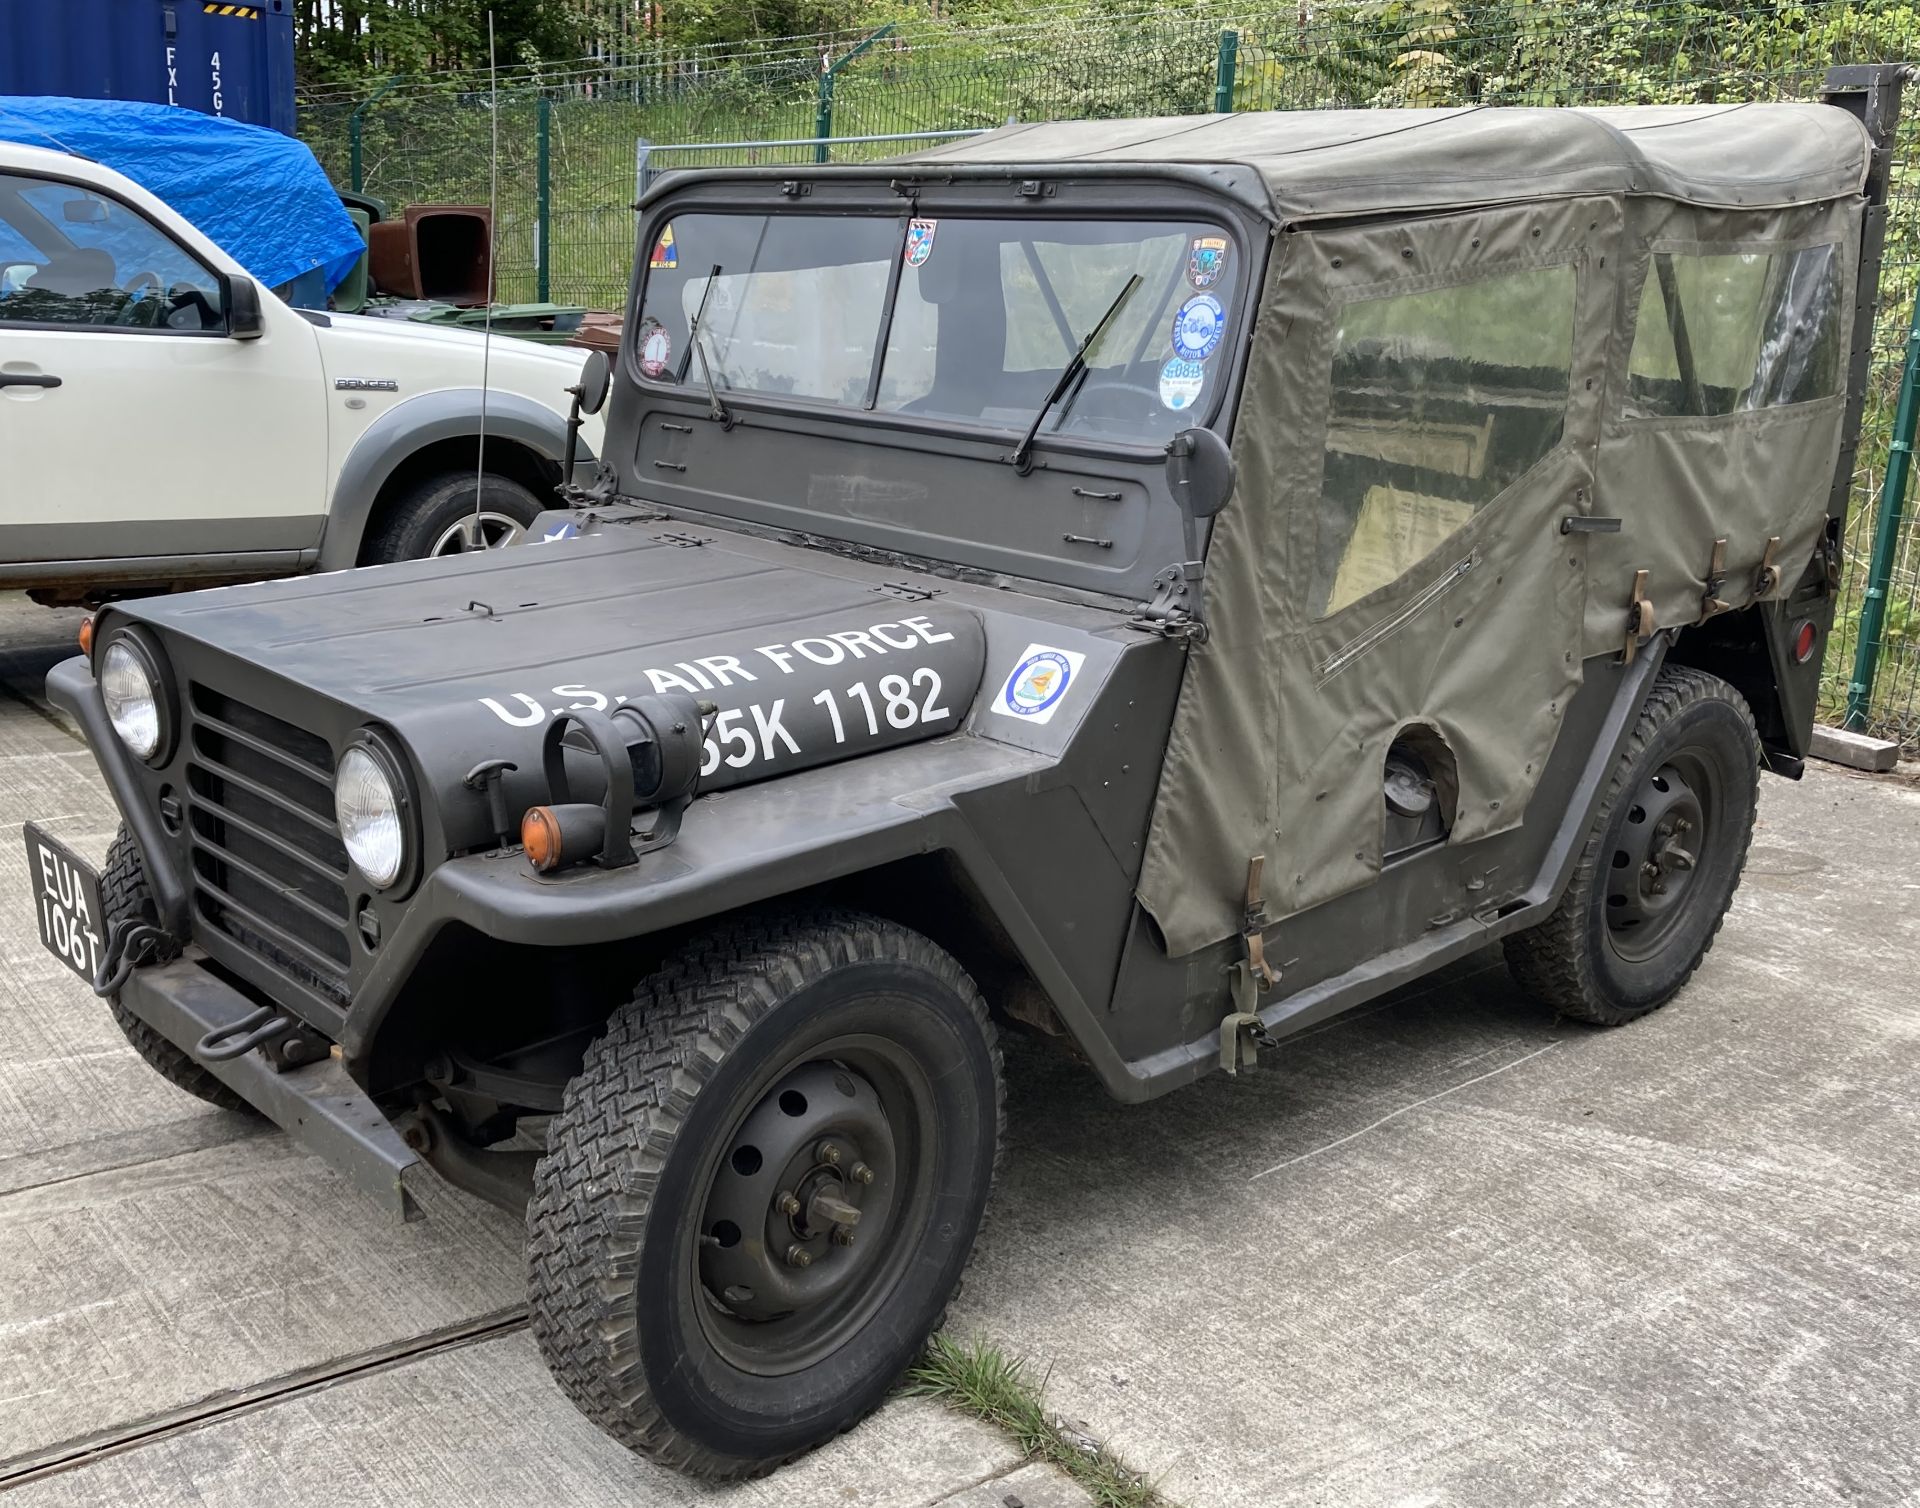 A FORD M151 (WILLYS) 1/4 TON 2.2 LIGHT 4X4 UTILITY JEEP - Petrol - Green - Ex USA Air Force. - Image 9 of 28